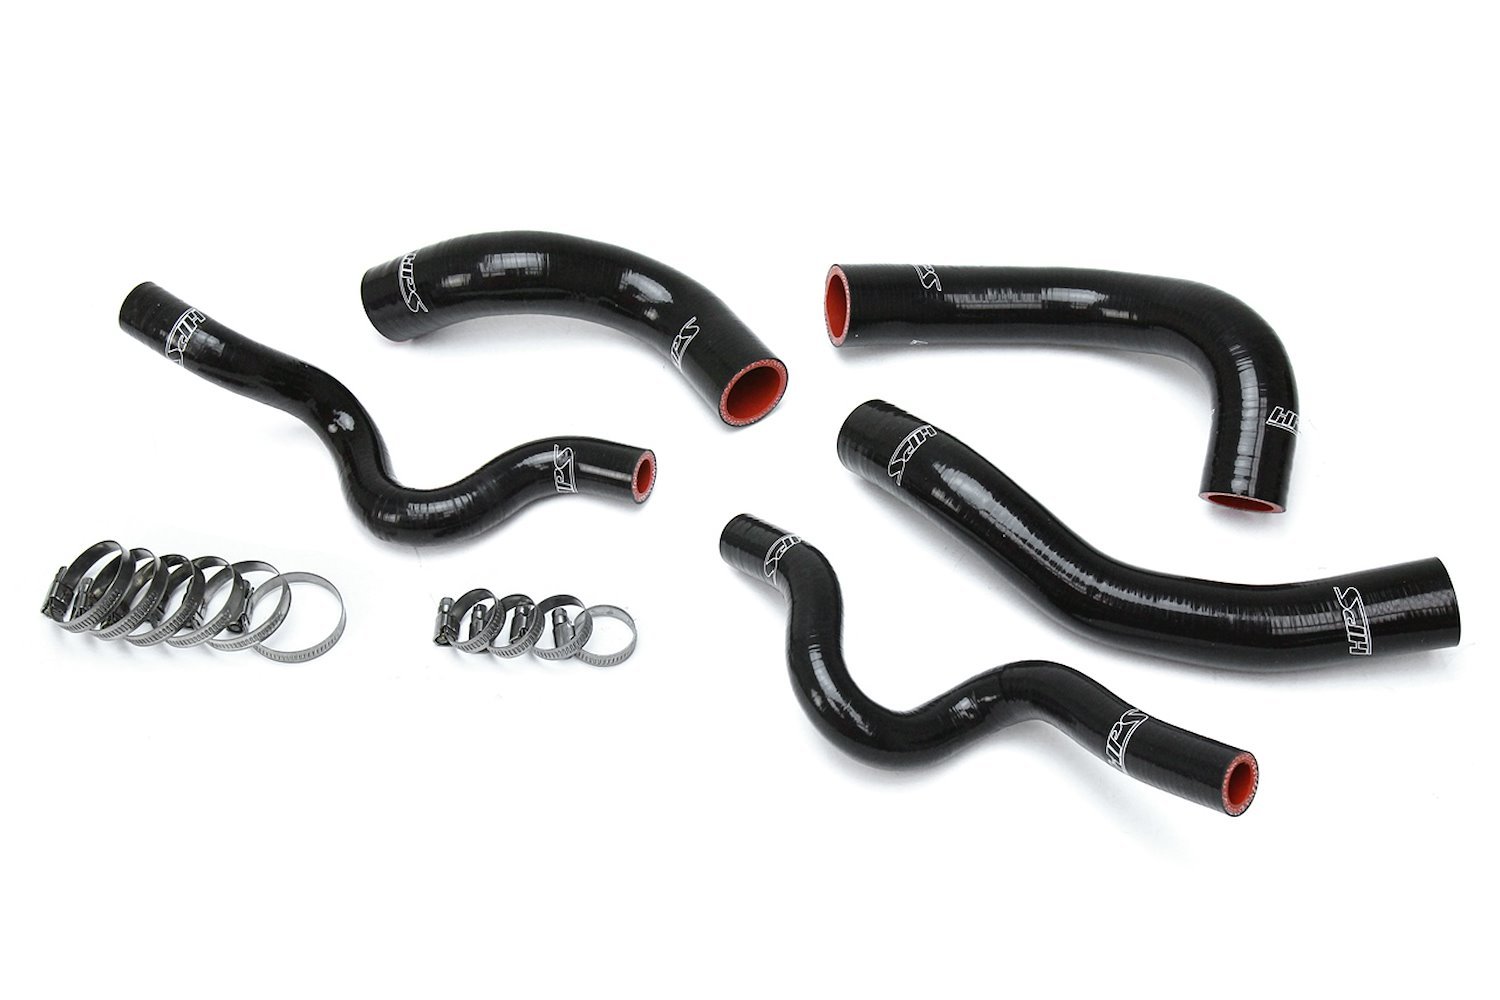 57-1630-BLK Radiator Hose Kit, High-Temp 3-Ply Reinforced Silicone, Replace OEM Rubber Radiator Coolant Hoses